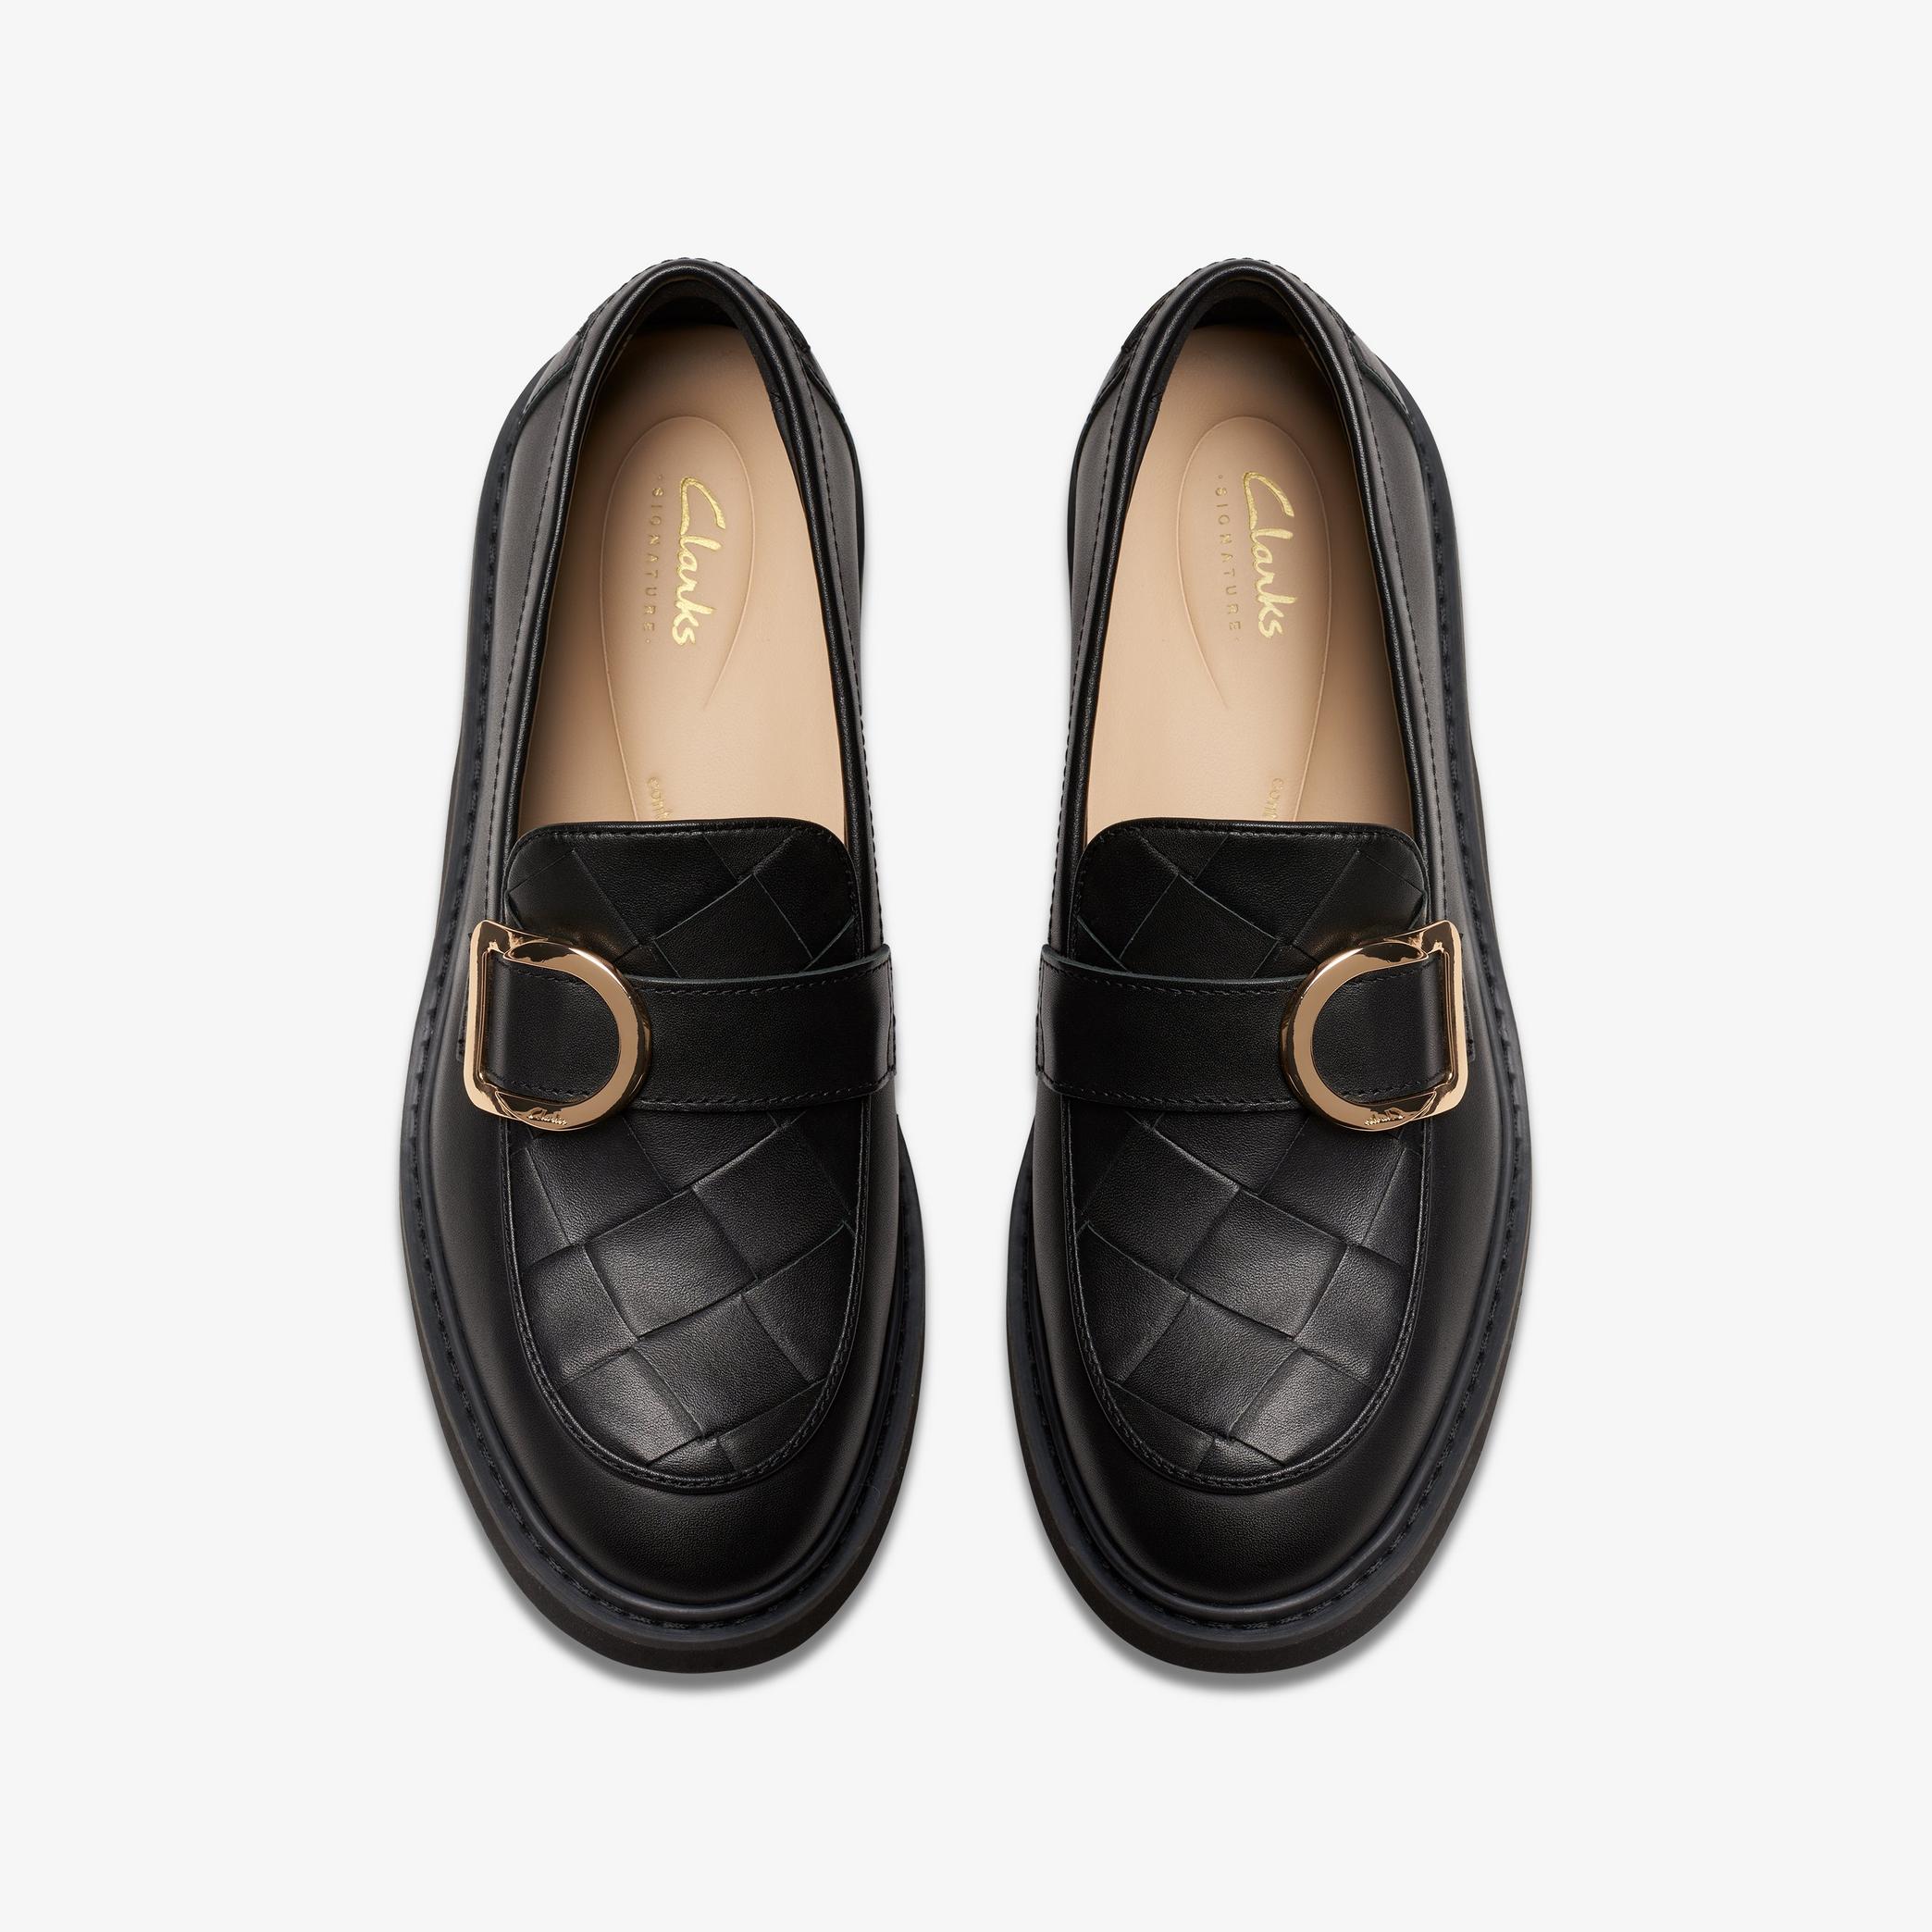 SPLEND PENNY Black Leather Loafers, view 6 of 6